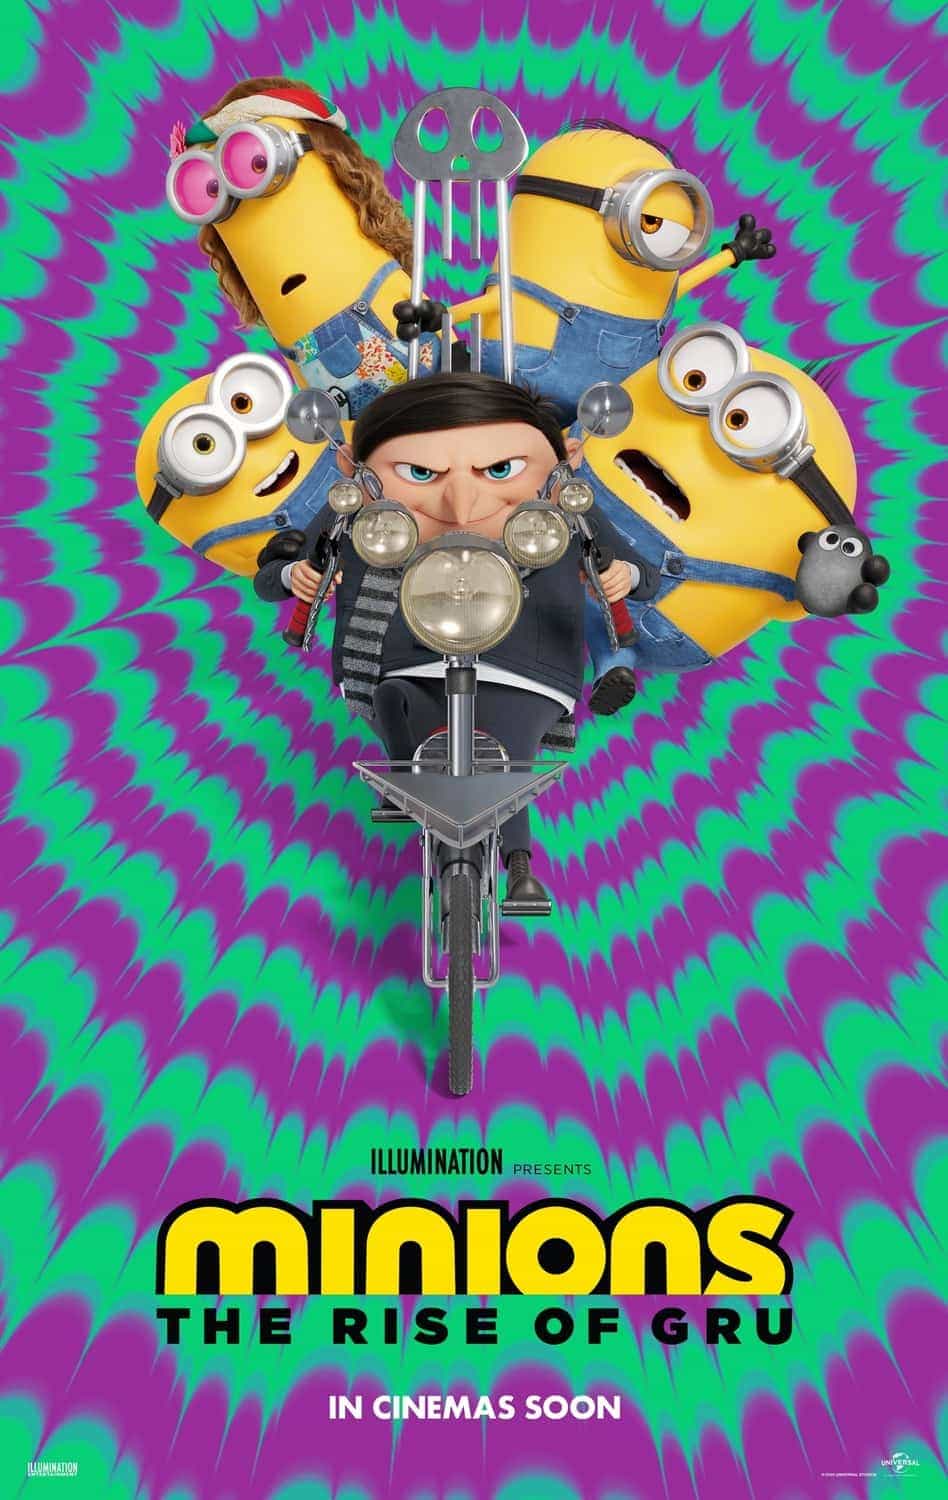 US Box Office Weekend Report 1st - 3rd July 2022: Minions 2 makes its debut at the top of the North American box office over July 4th weekend with a record breaking gross